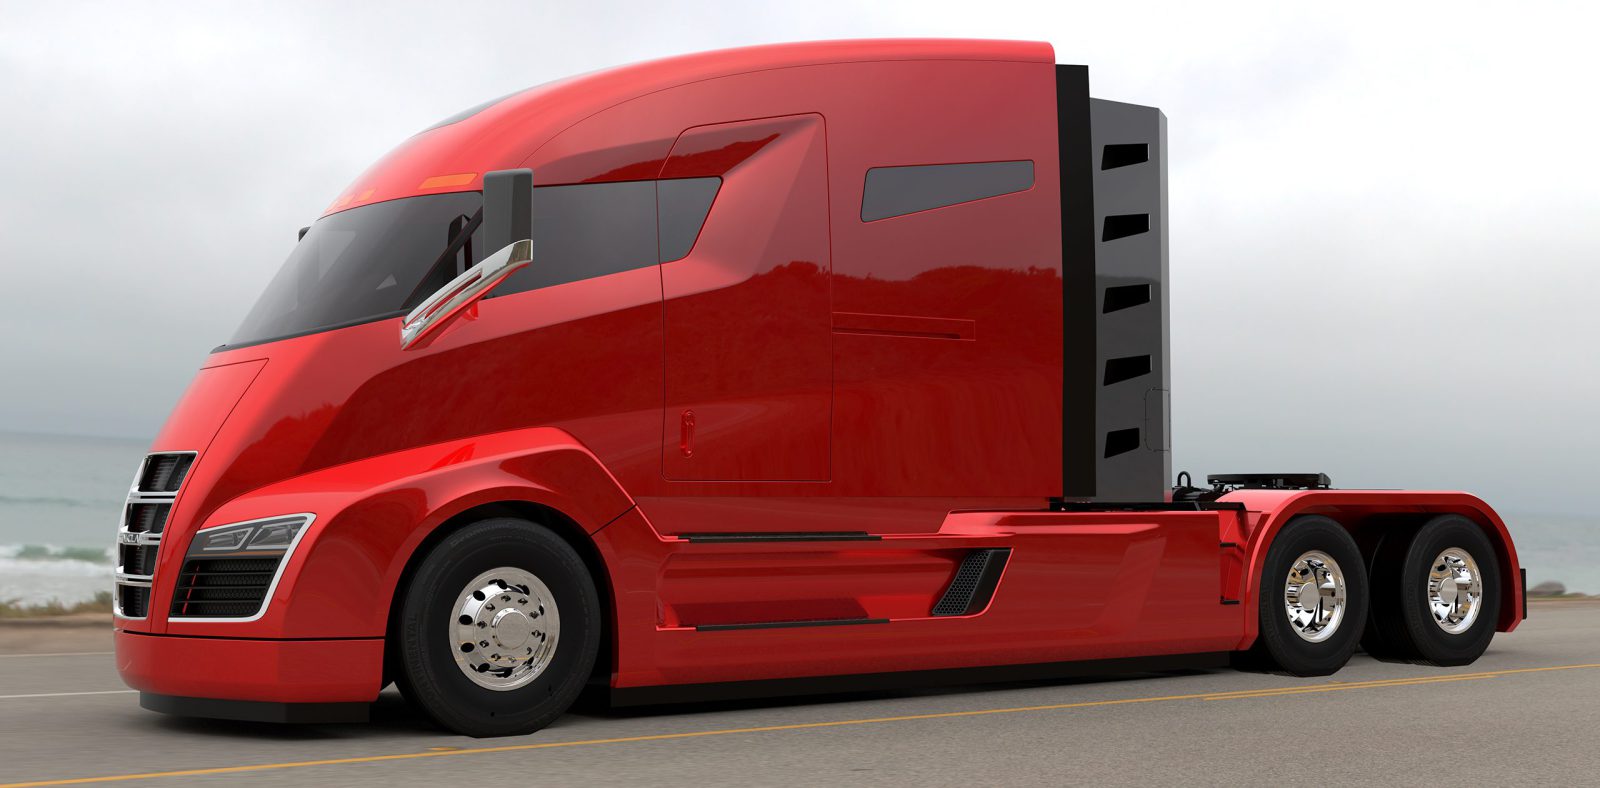 All about Tesla's electric truck